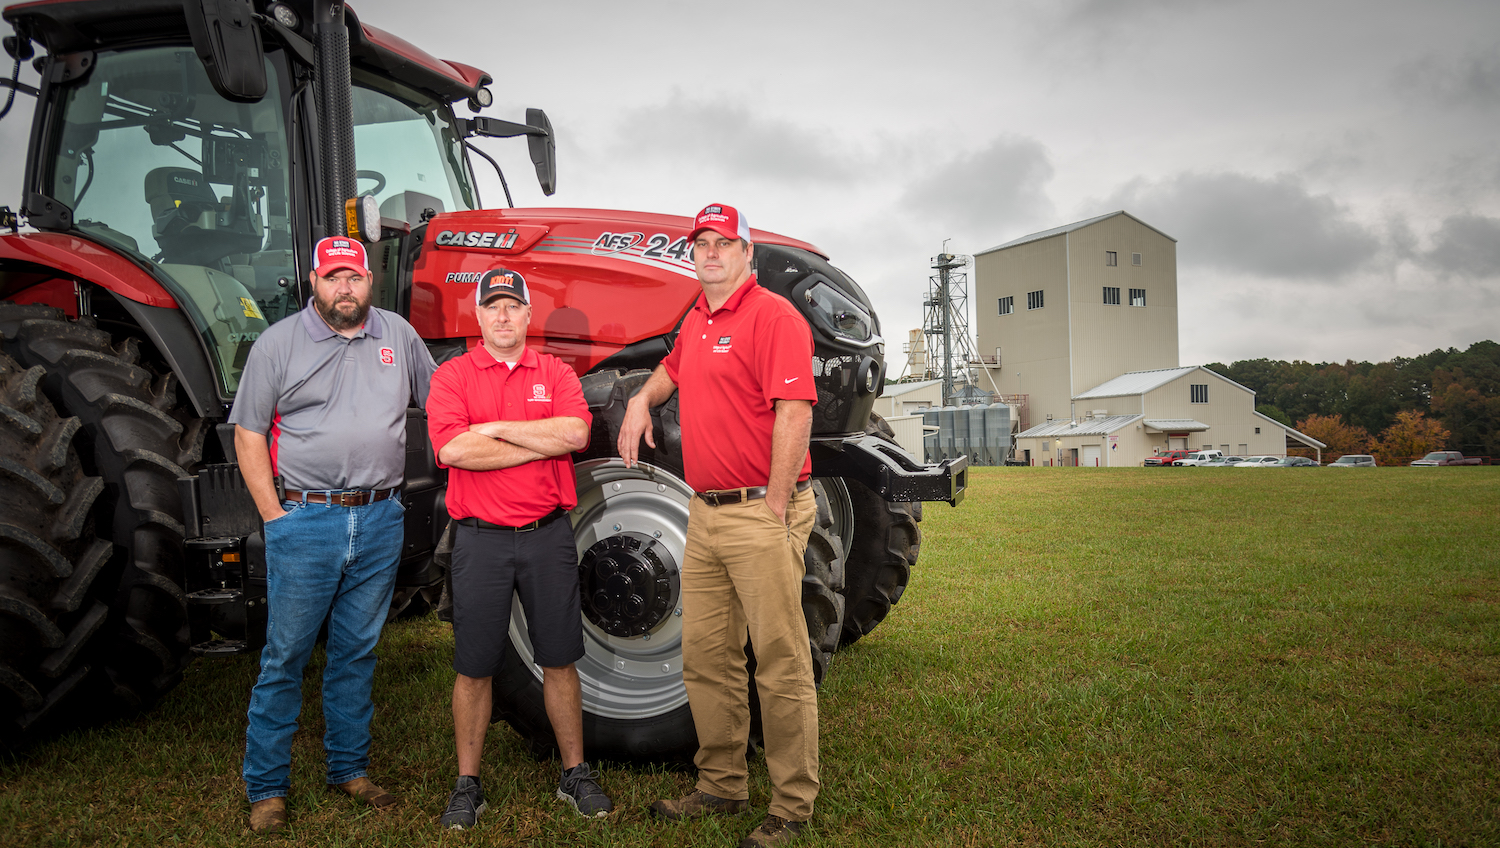 Chad Carter, Philip Newton and Bill Whaley stand in front of a tractor